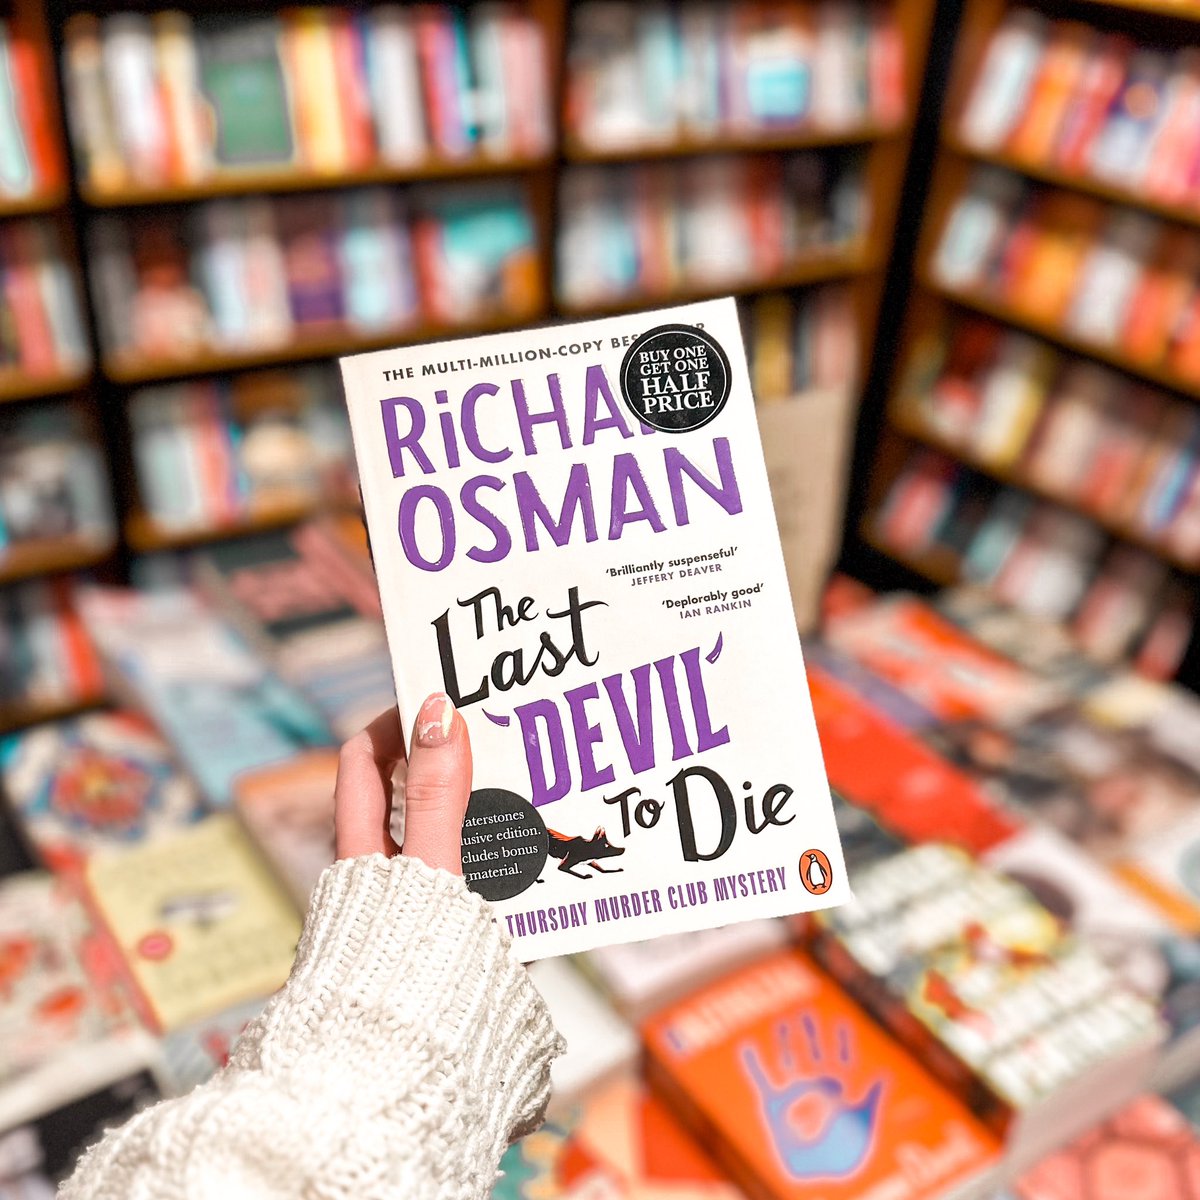 Richard Osman’s The Last Devil to Die is here now in paperback! 🦊

#bookstagram #waterstonesnorthallerton #northallerton #bookshop #lovenorthallerton #waterstones #richardosman #thelastdeviltodie